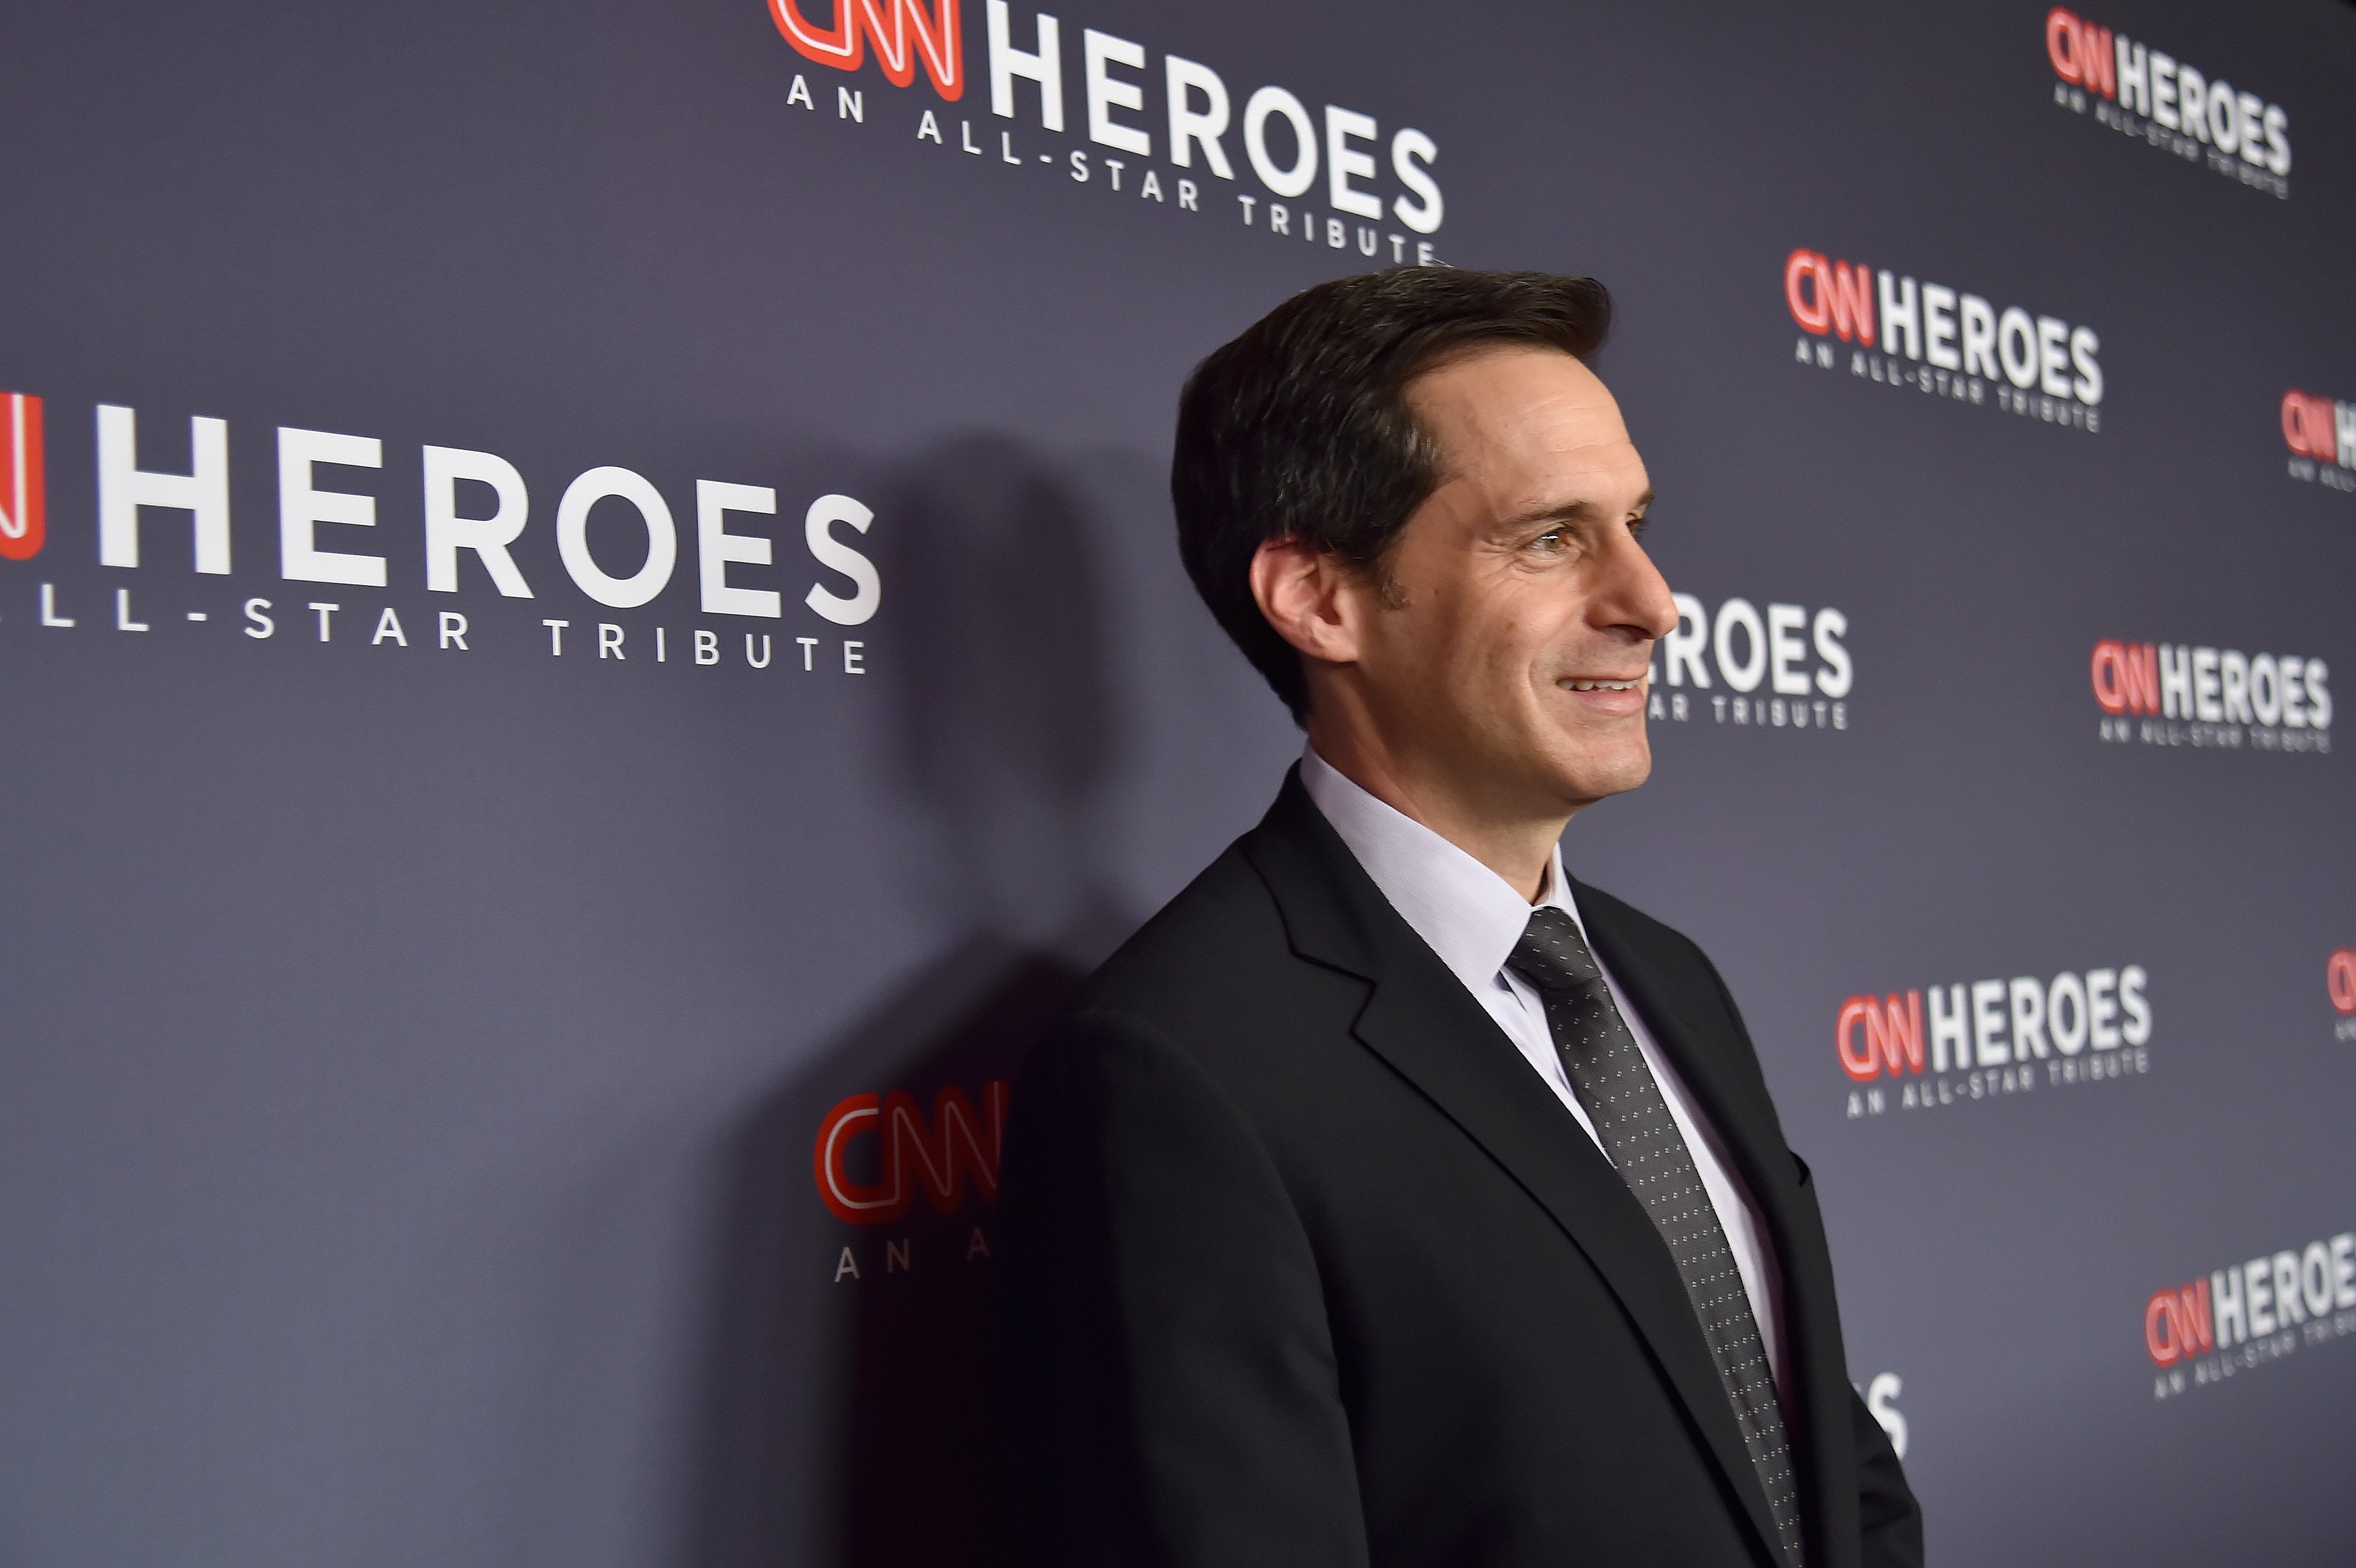 John Berman's arrival on the red carpet of CNN Heroes 2017 hosted in the American Museum of Natural History in New York City on December 17, 2017. | Source: Getty Images